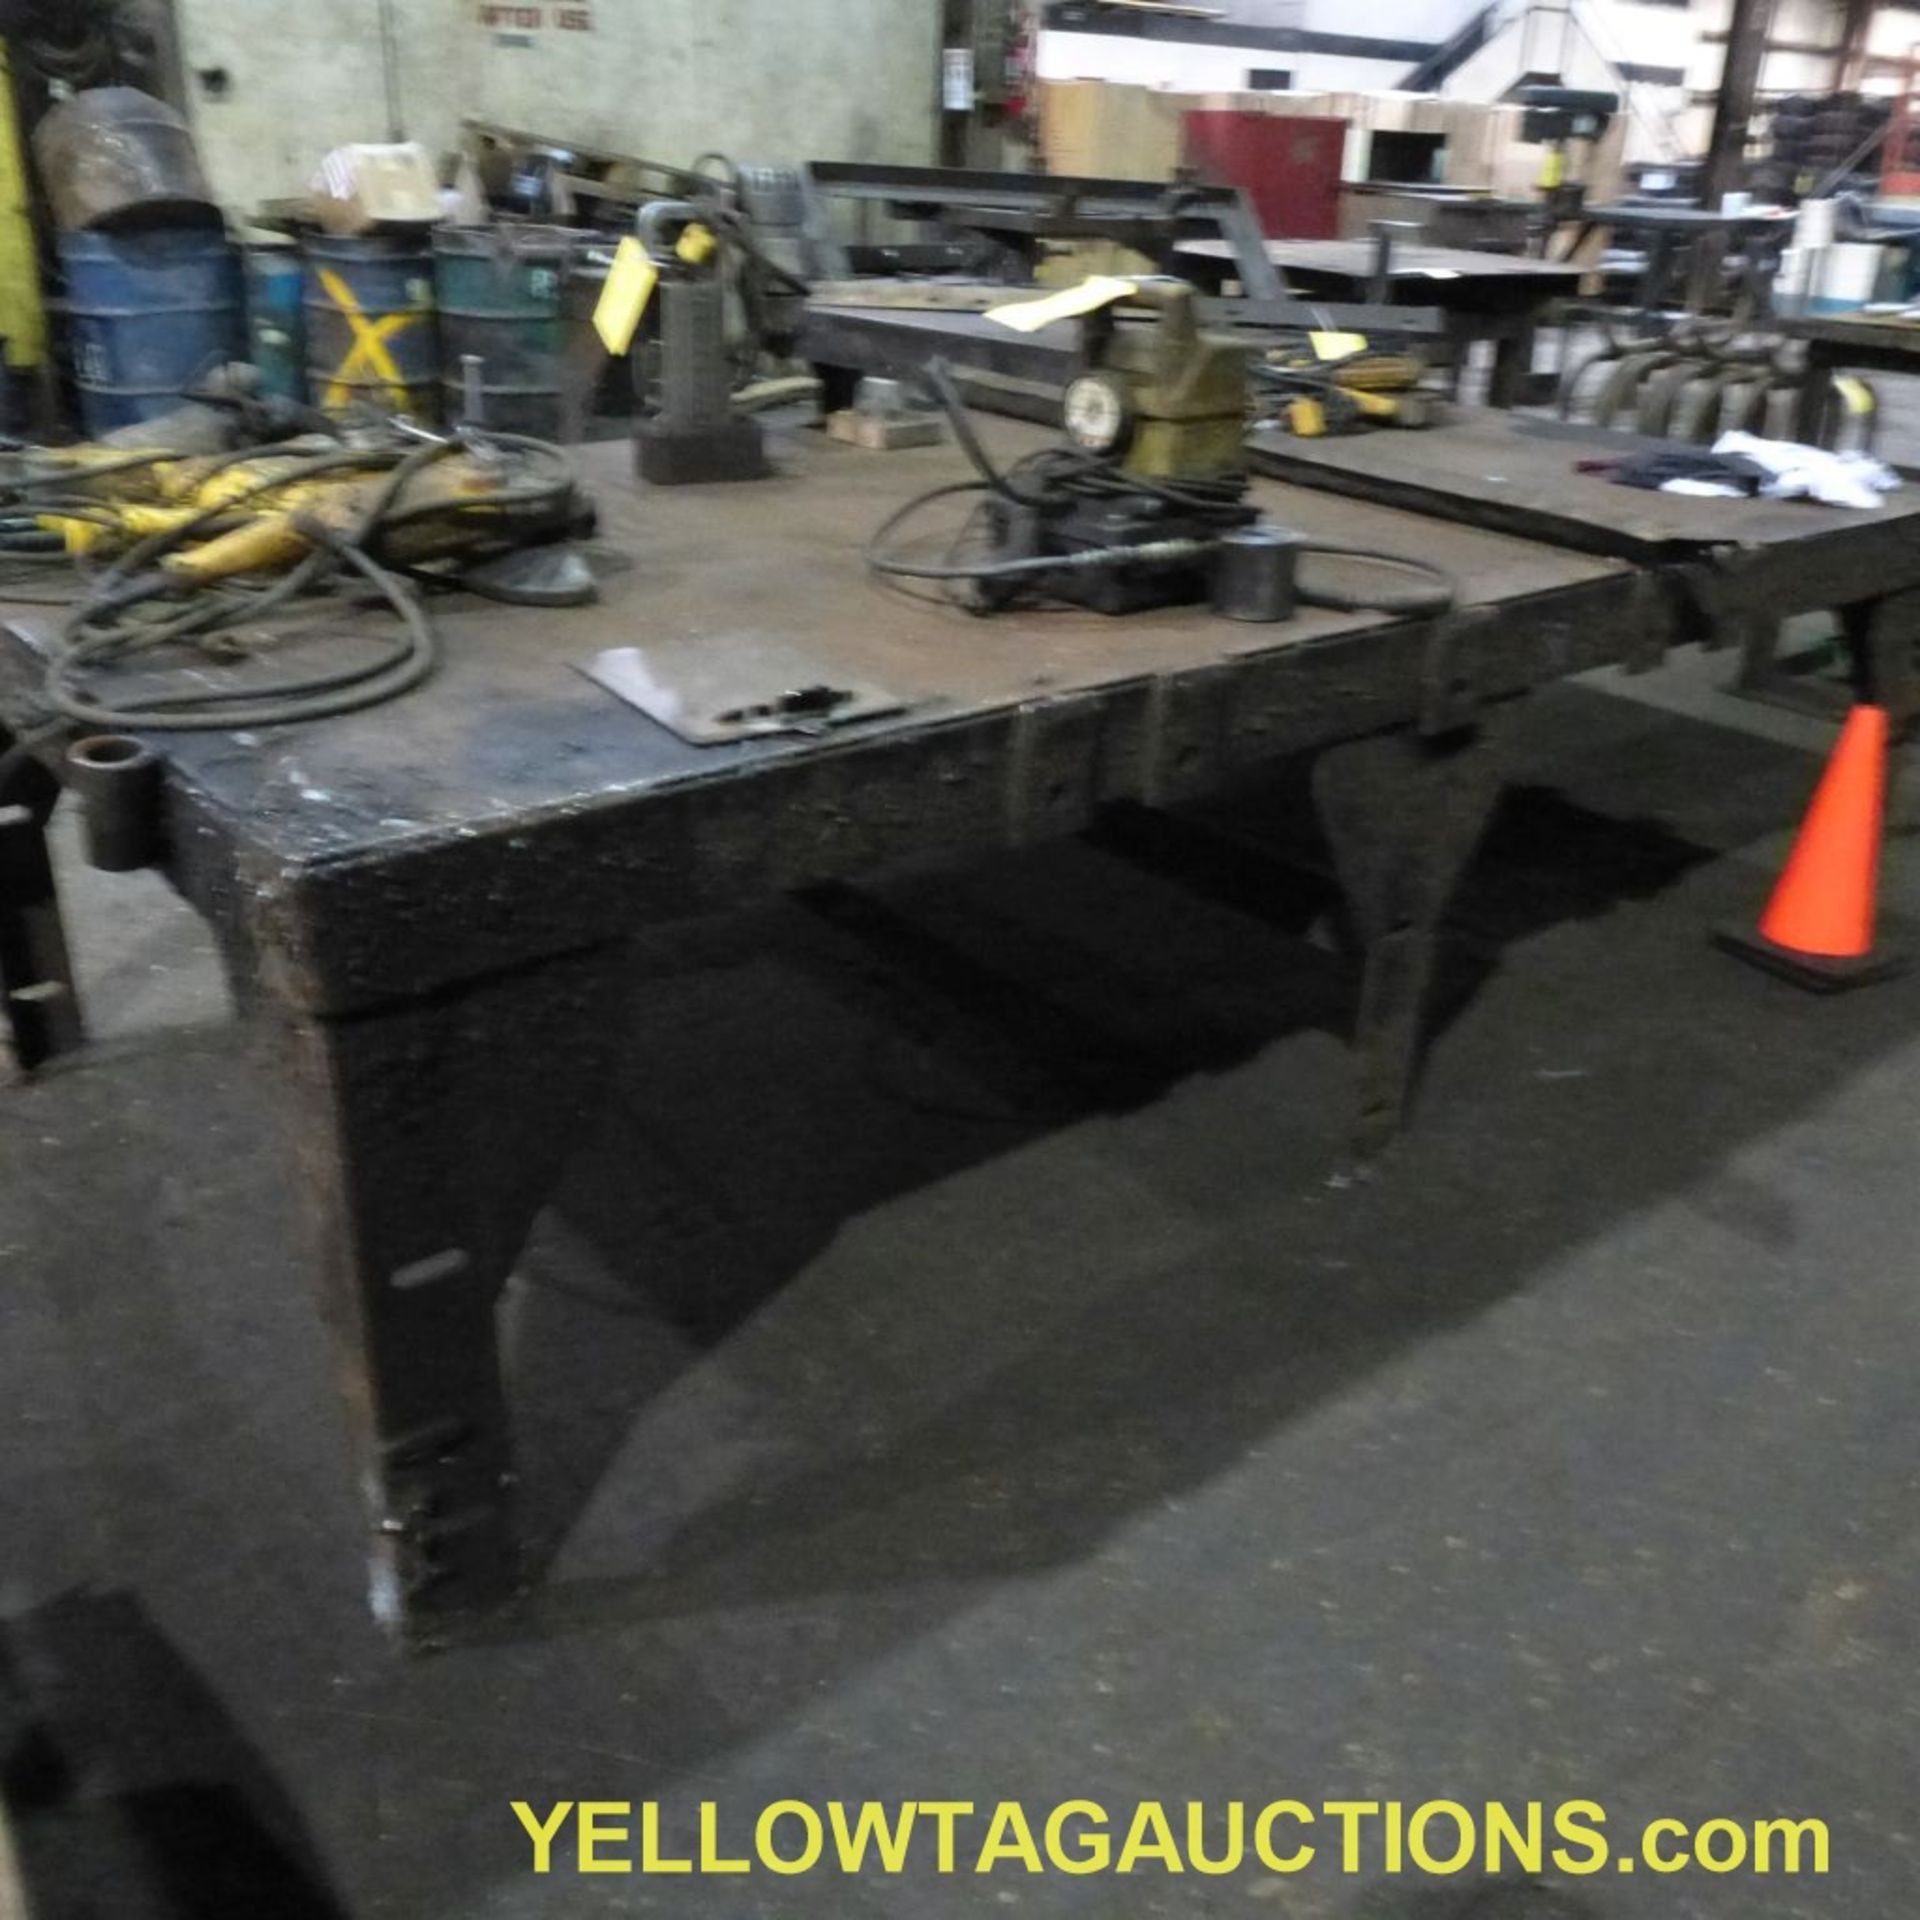 Steel Work Bench/Welding Table|58" x 120" x 33"|Tag: 785 - Image 4 of 4